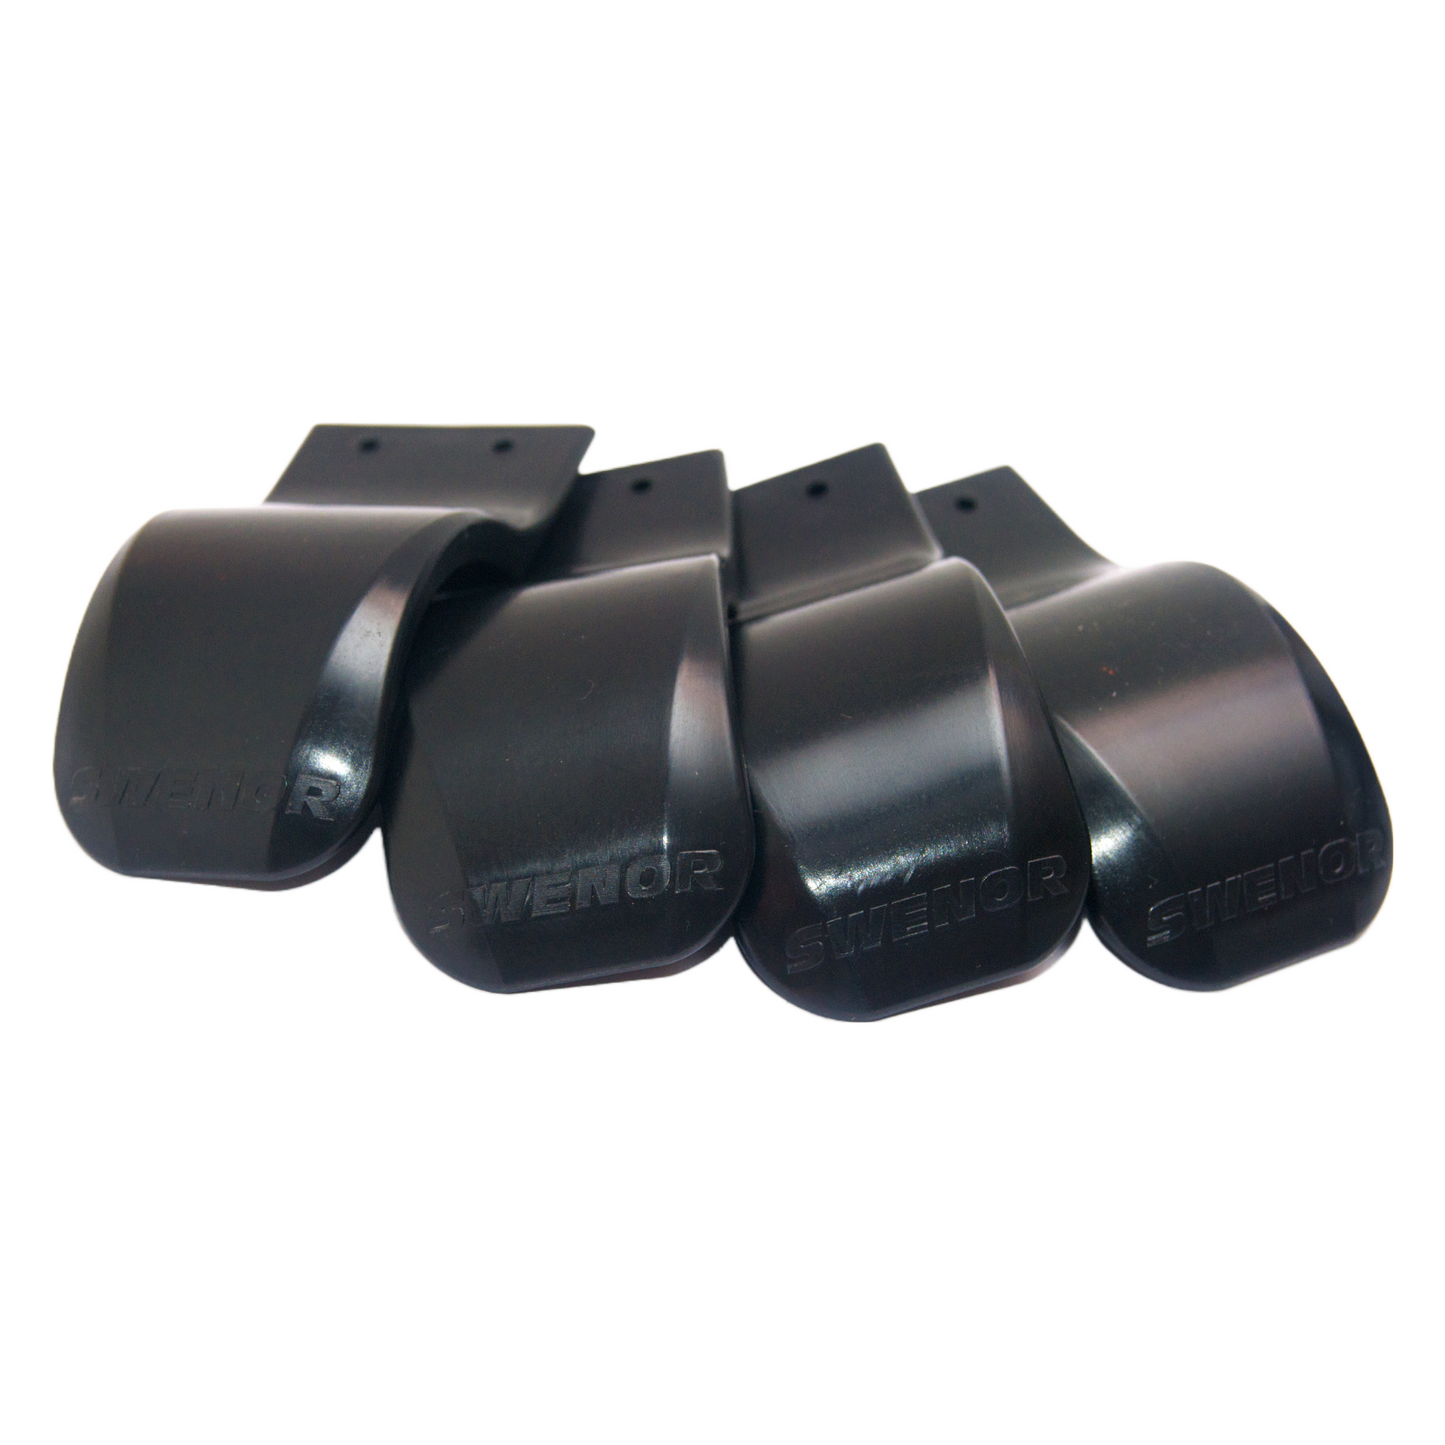 A product picture of the Swenor Fiberglass/Carbonfiber Classic Fenders Pack of 4 